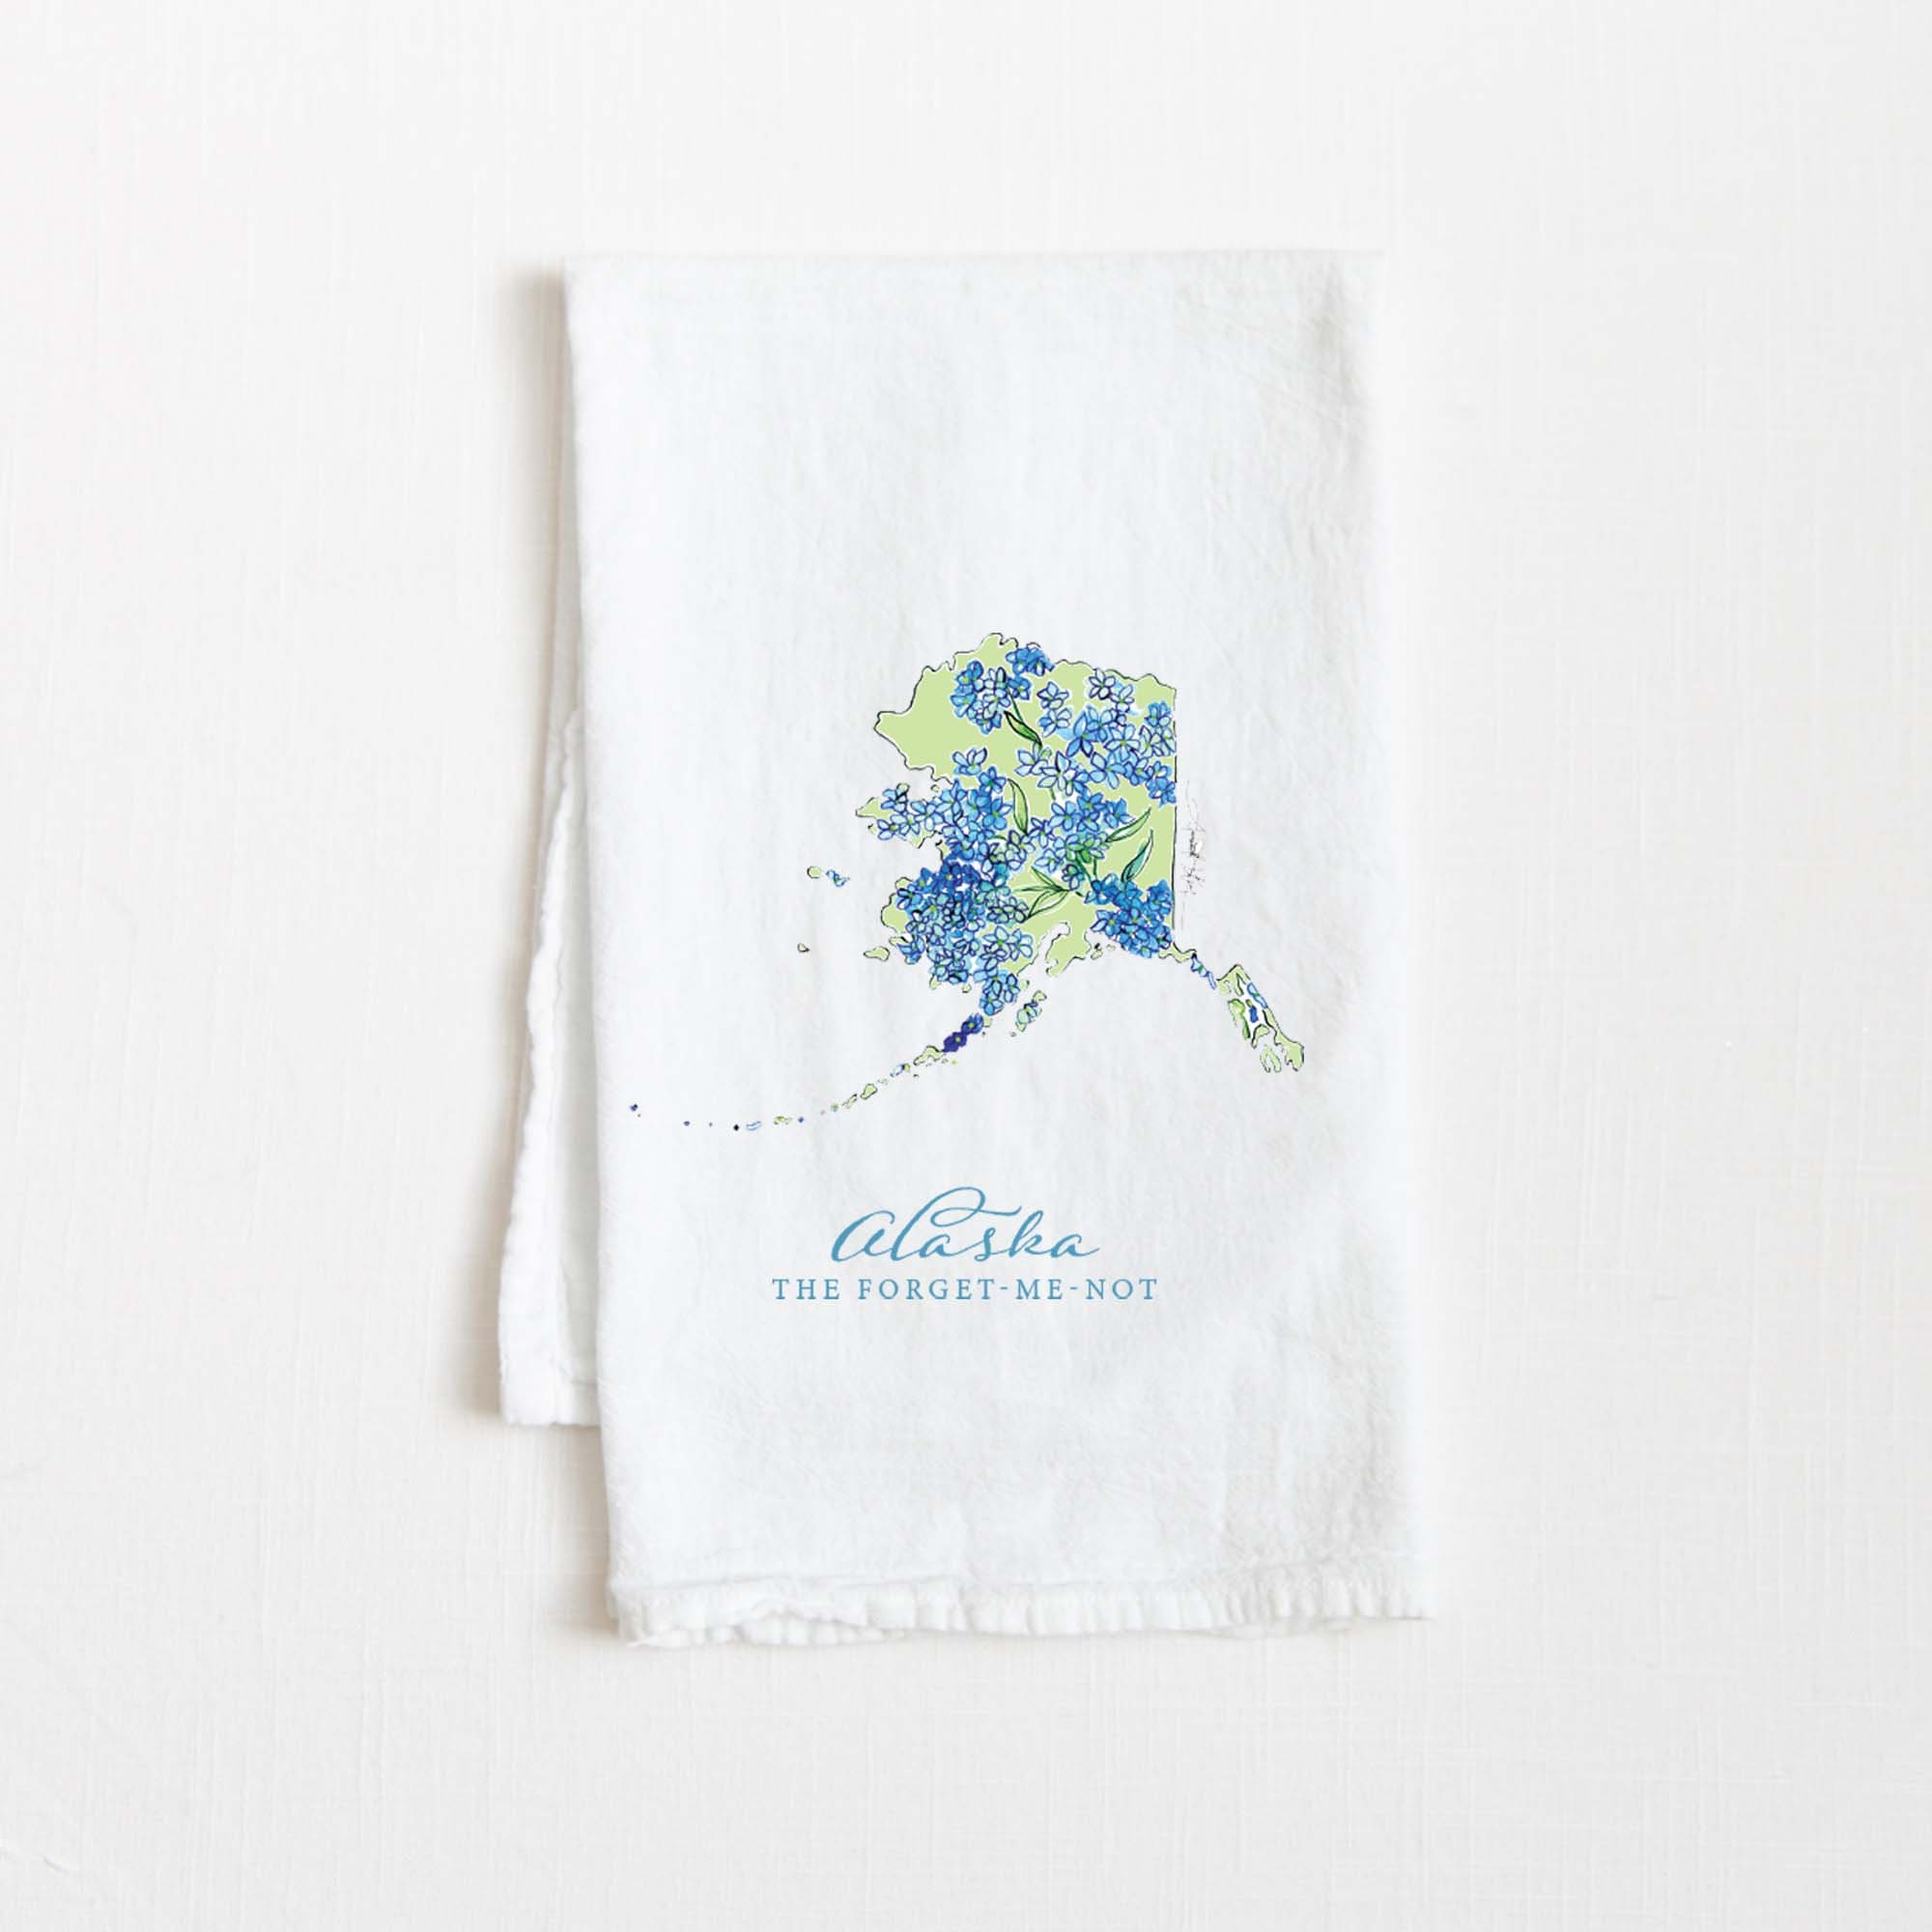 Reusable Kitchen Towels - AK Crafty Kreations